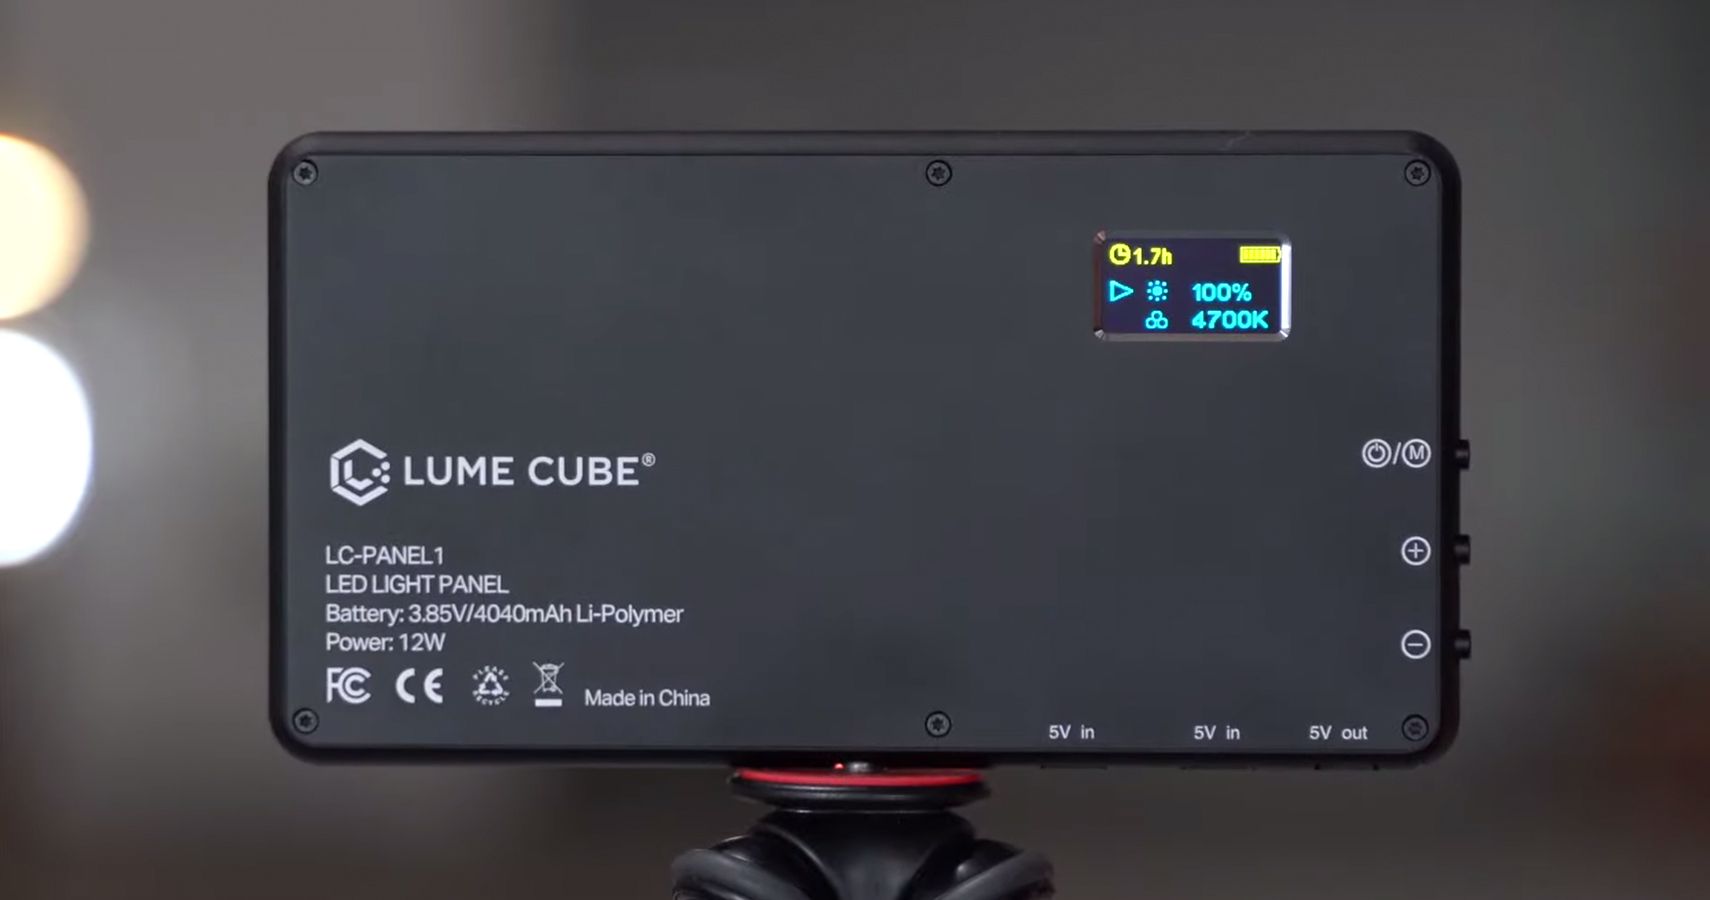 Lume Cube LED Light Panel Review A Bright Way To Improve Video Image Quality